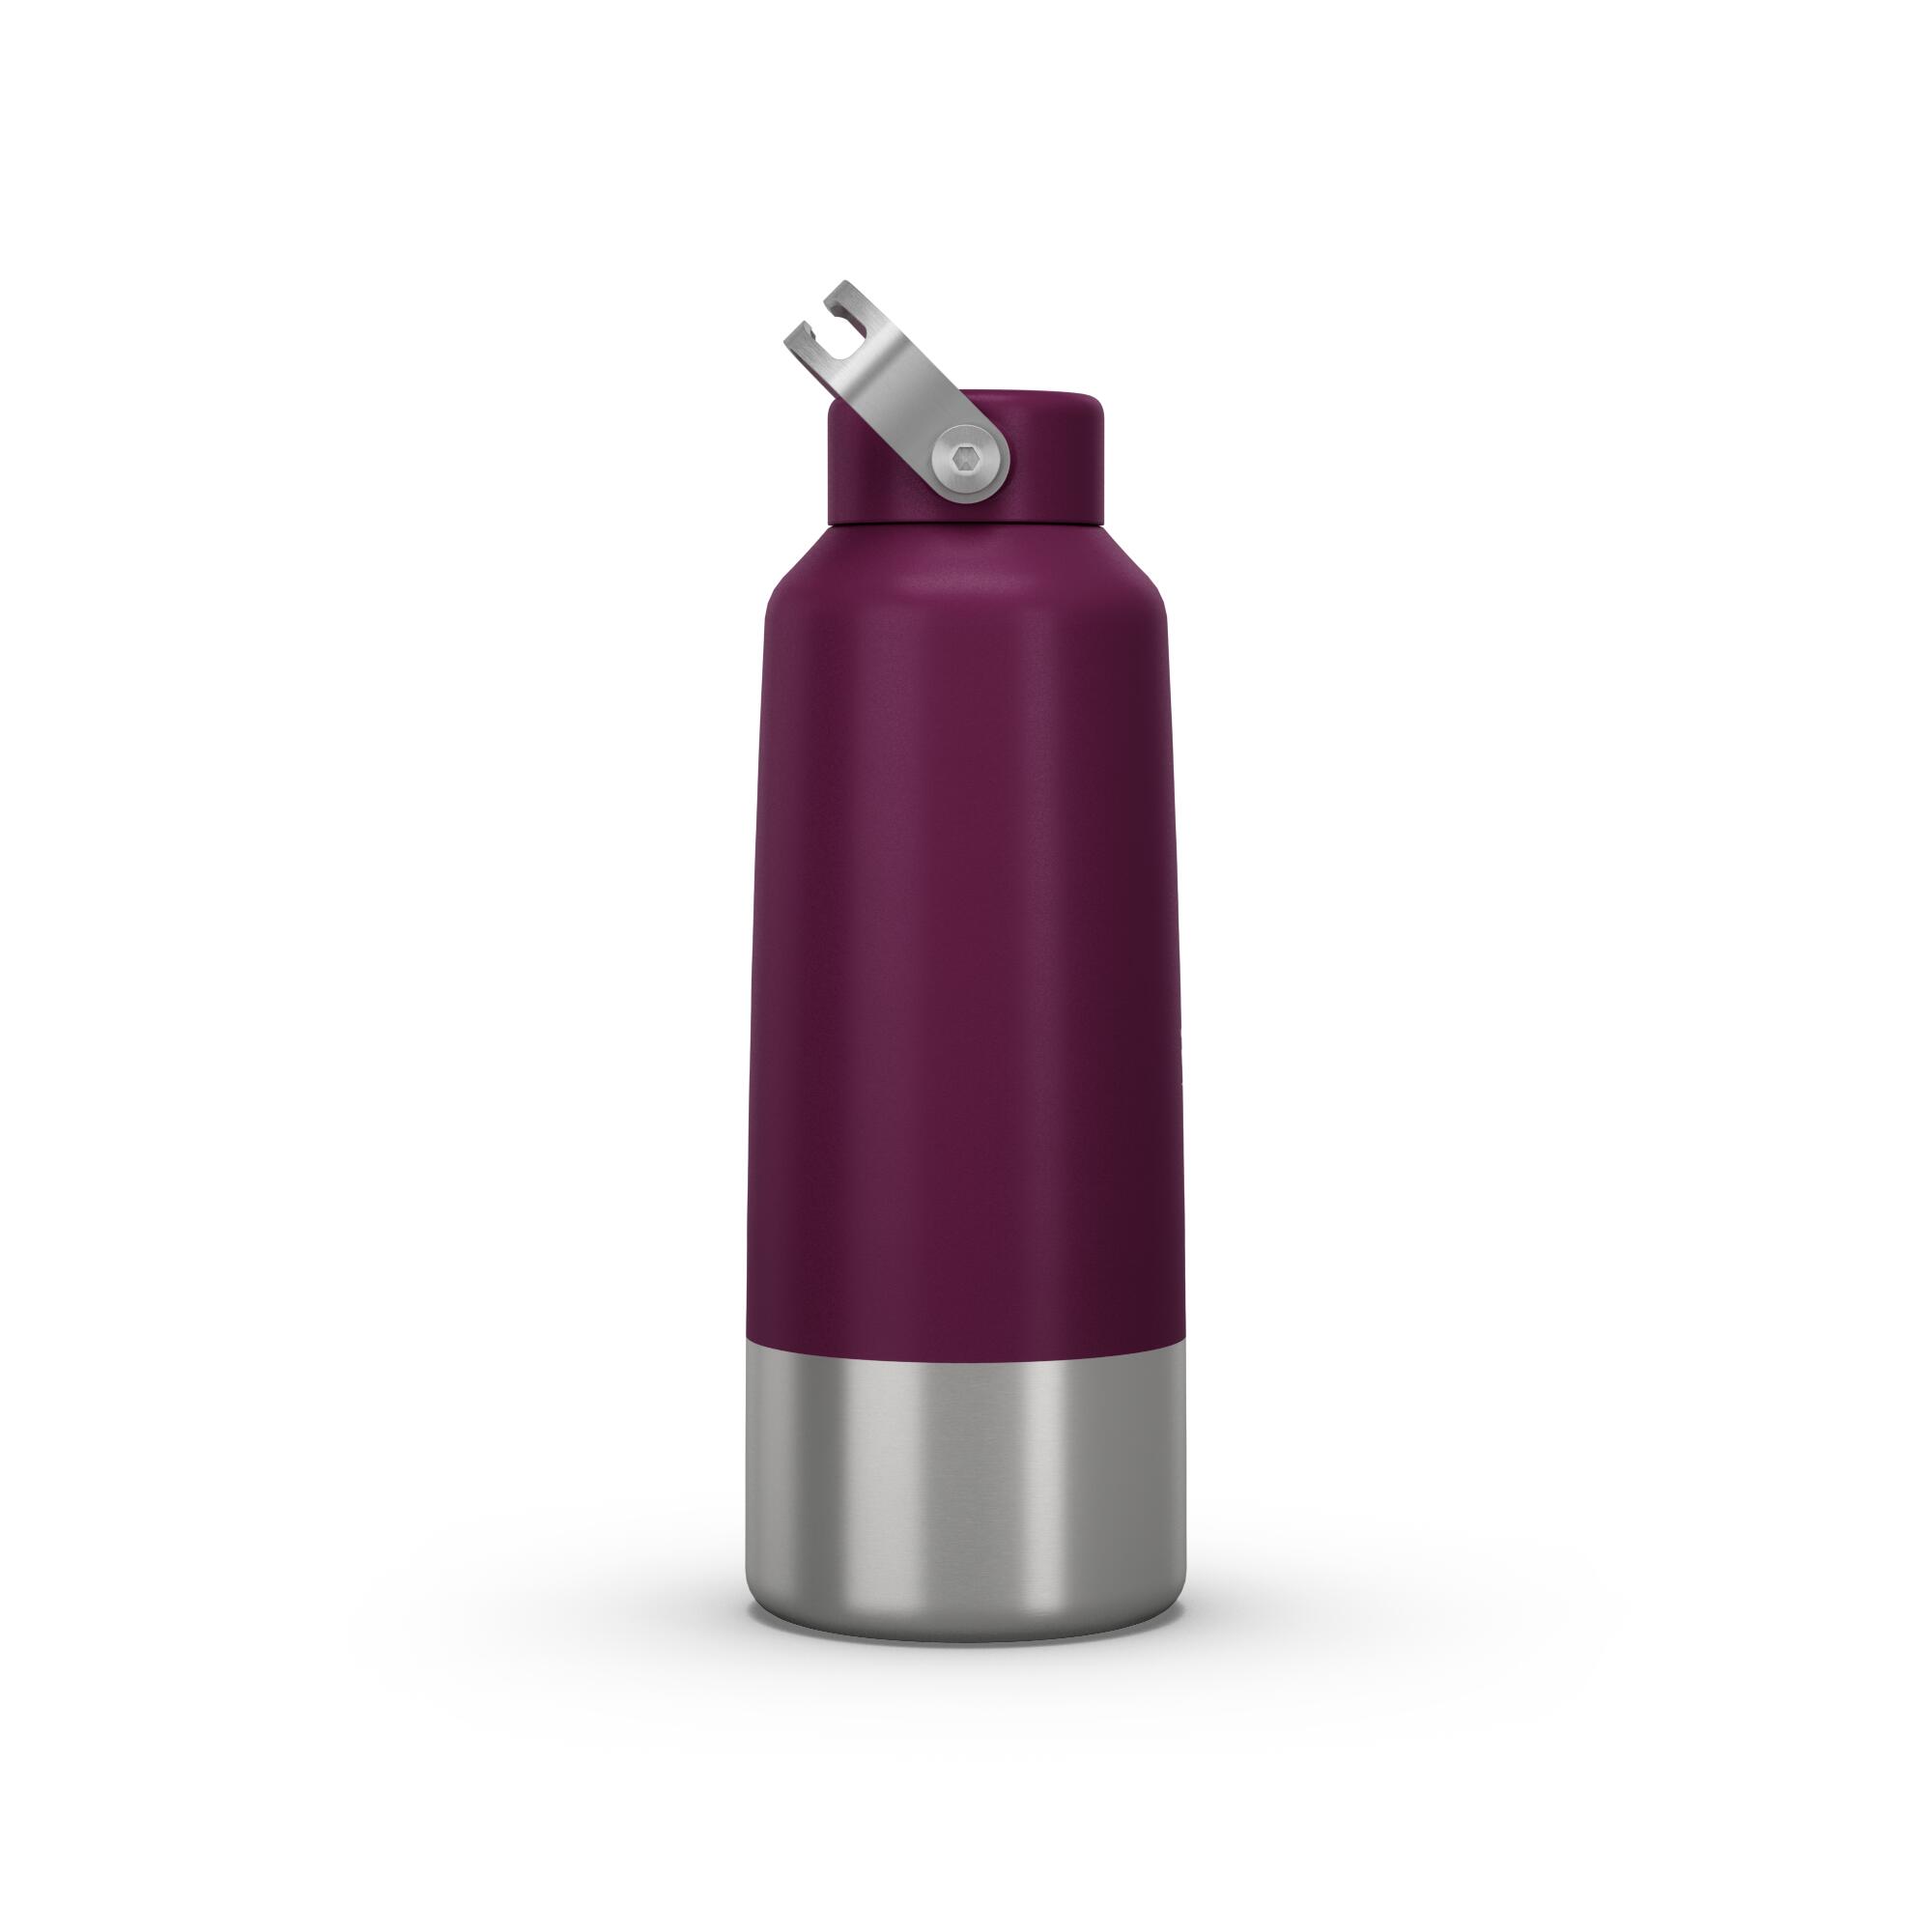 QUECHUA Stainless Steel Water Bottle with Screw Cap for Hiking 1 L - Purple